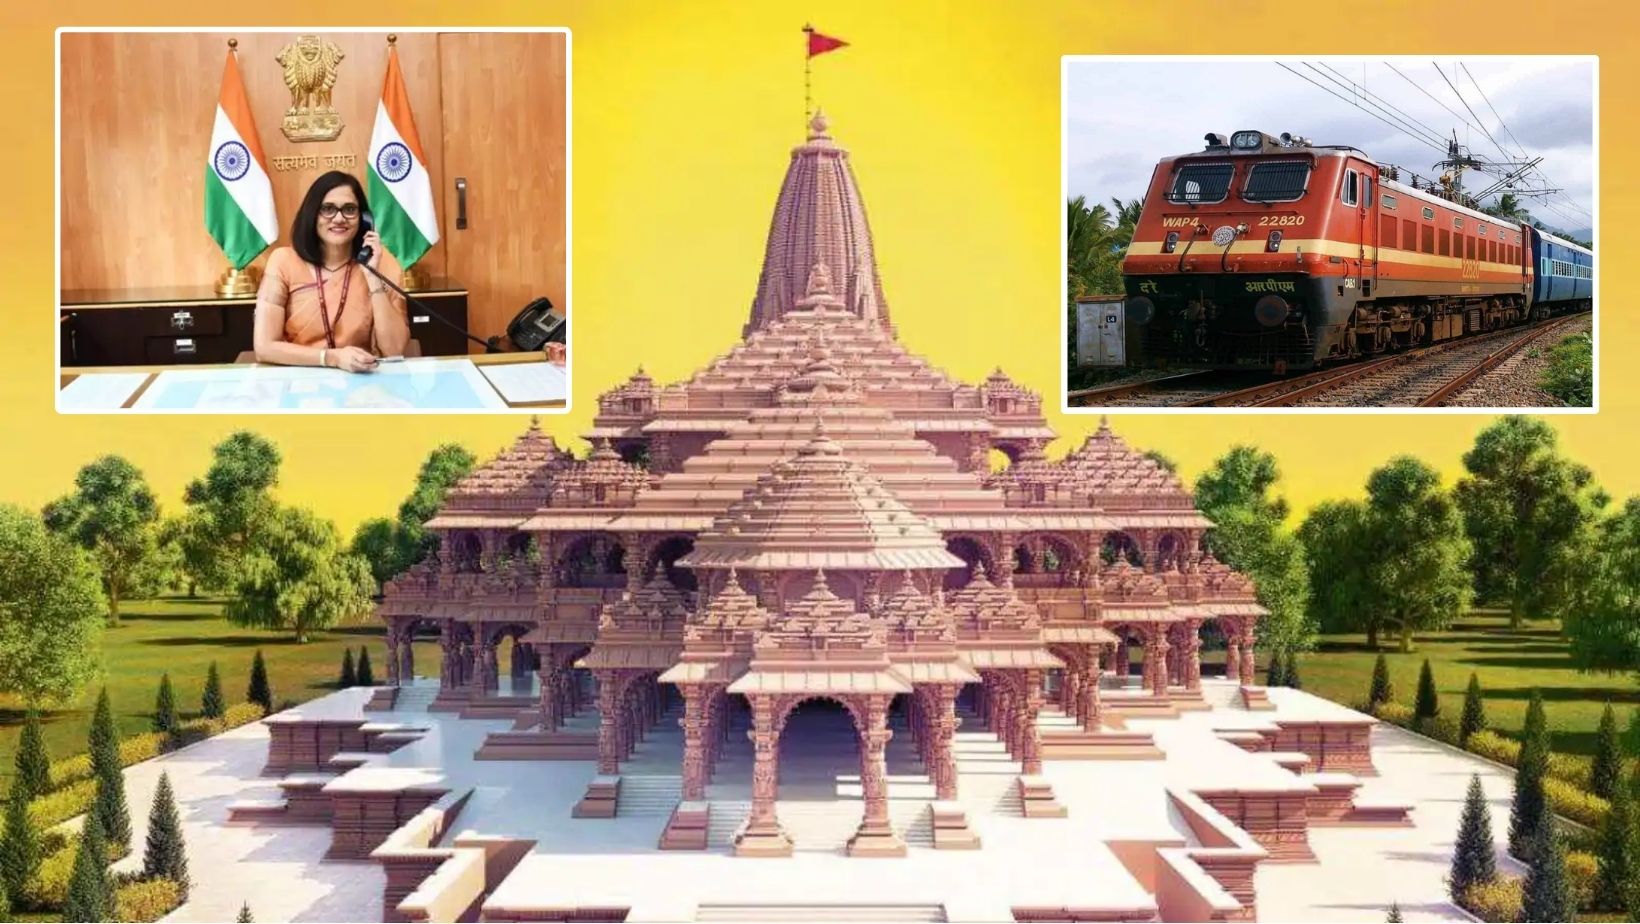 Read more about the article Railway board chairperson inspected two stations in Ayodhya ahead of Ram temple consecration